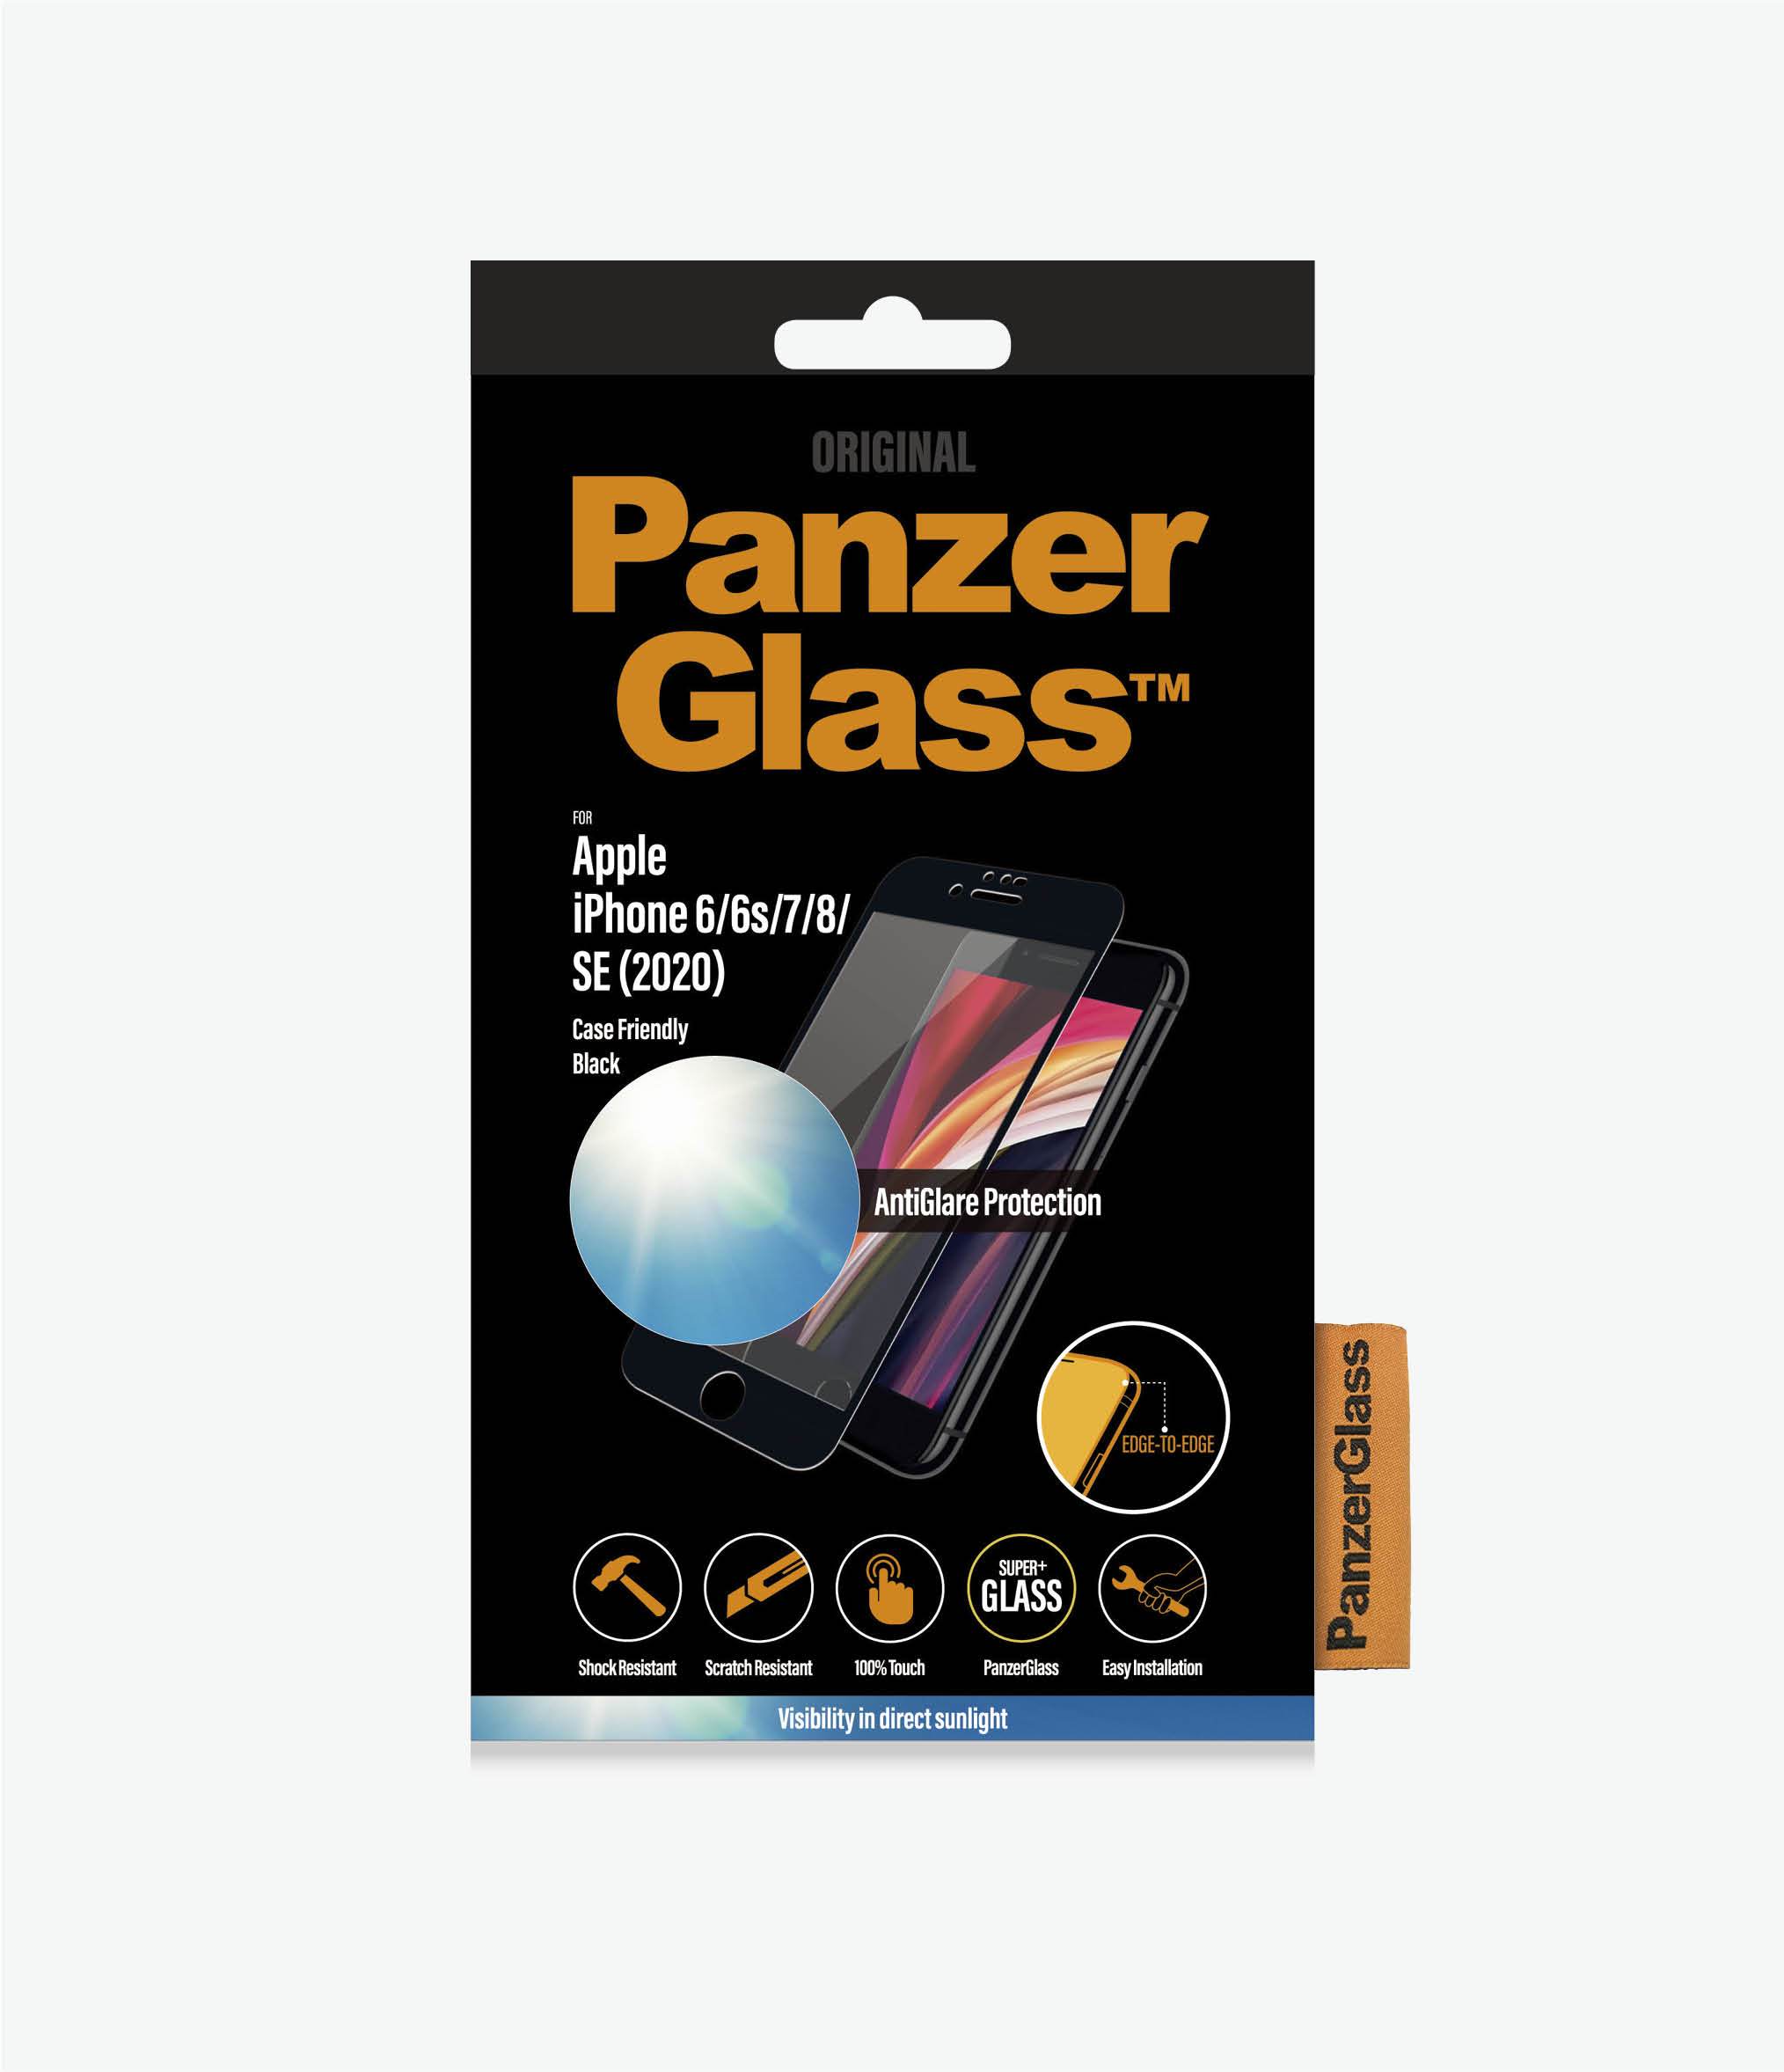 PanzerGlass™ Apple iPhone 6/6s/7/8/SE (2020) - Anti-glare (2700) - Screen Protector - Full Frame Coverage, Rounded edges, 100% touch preservation